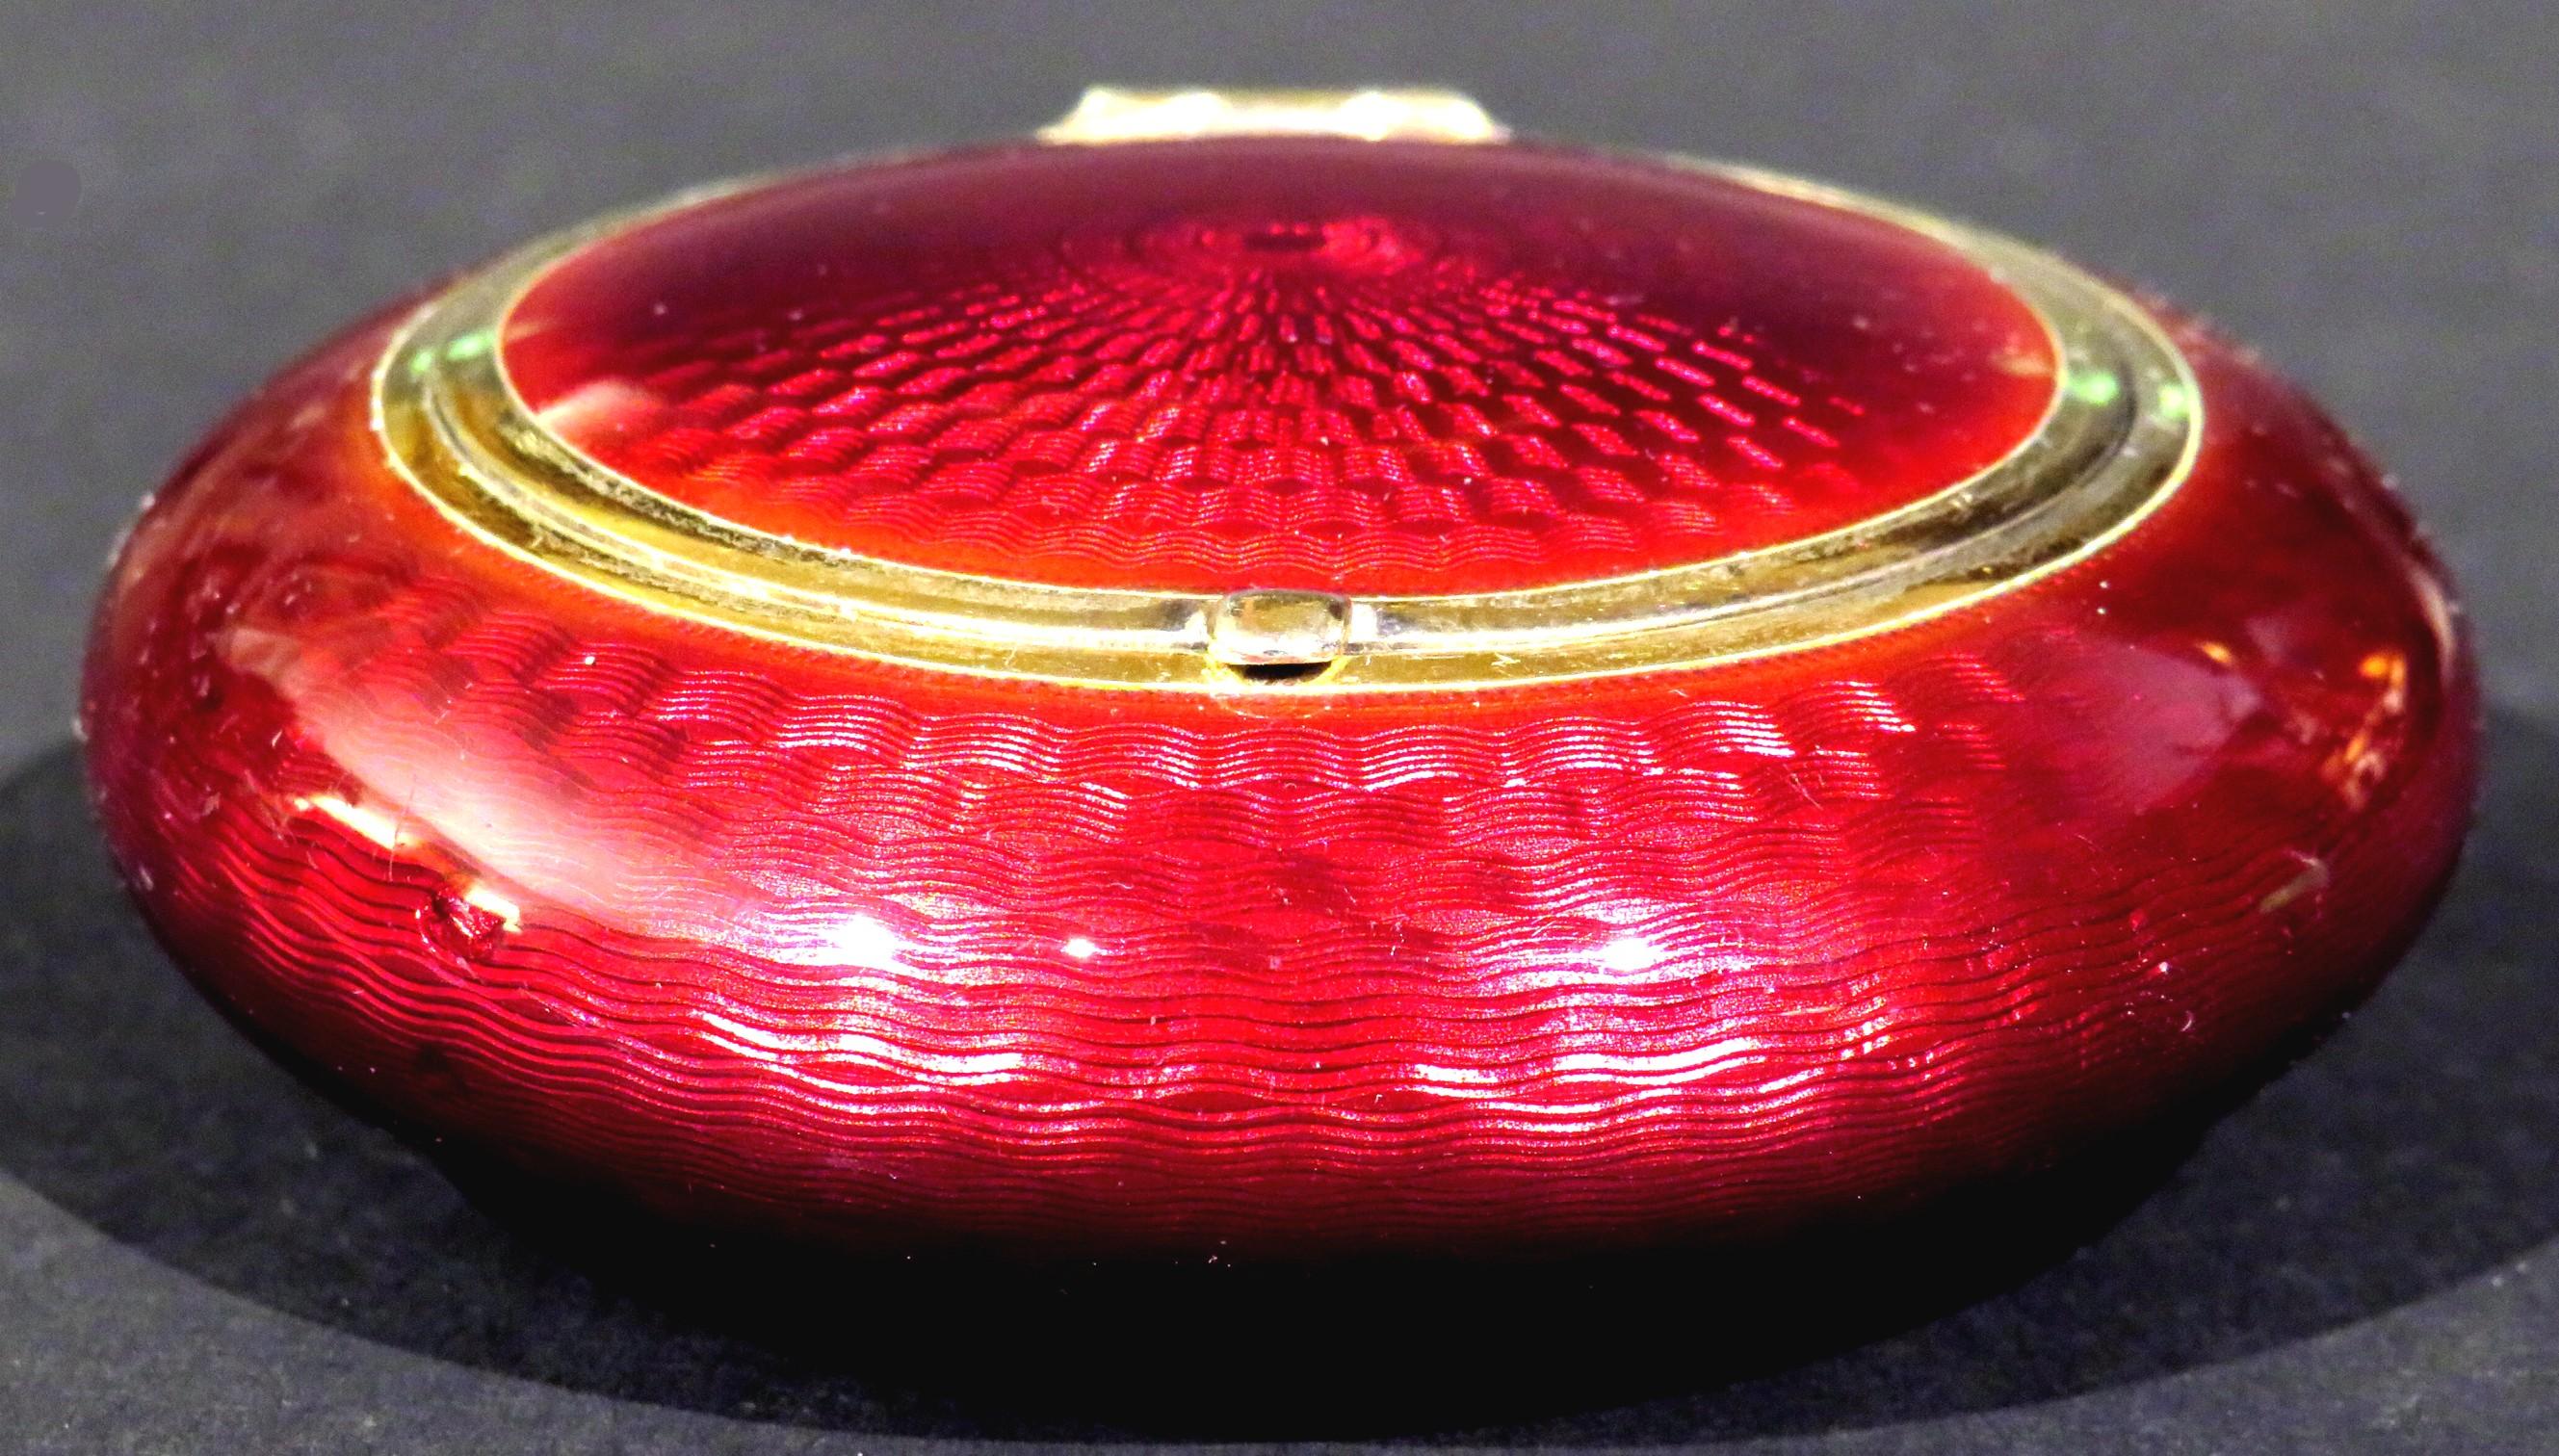 The disc-shaped case decorated in a stunning deep crimson guilloché enamel with a silver trimmed rim. The hinged lid showing a gilded interior surface bearing impressed makers marks for Norwegian artist Marius Hammer & silver purity marks denoting